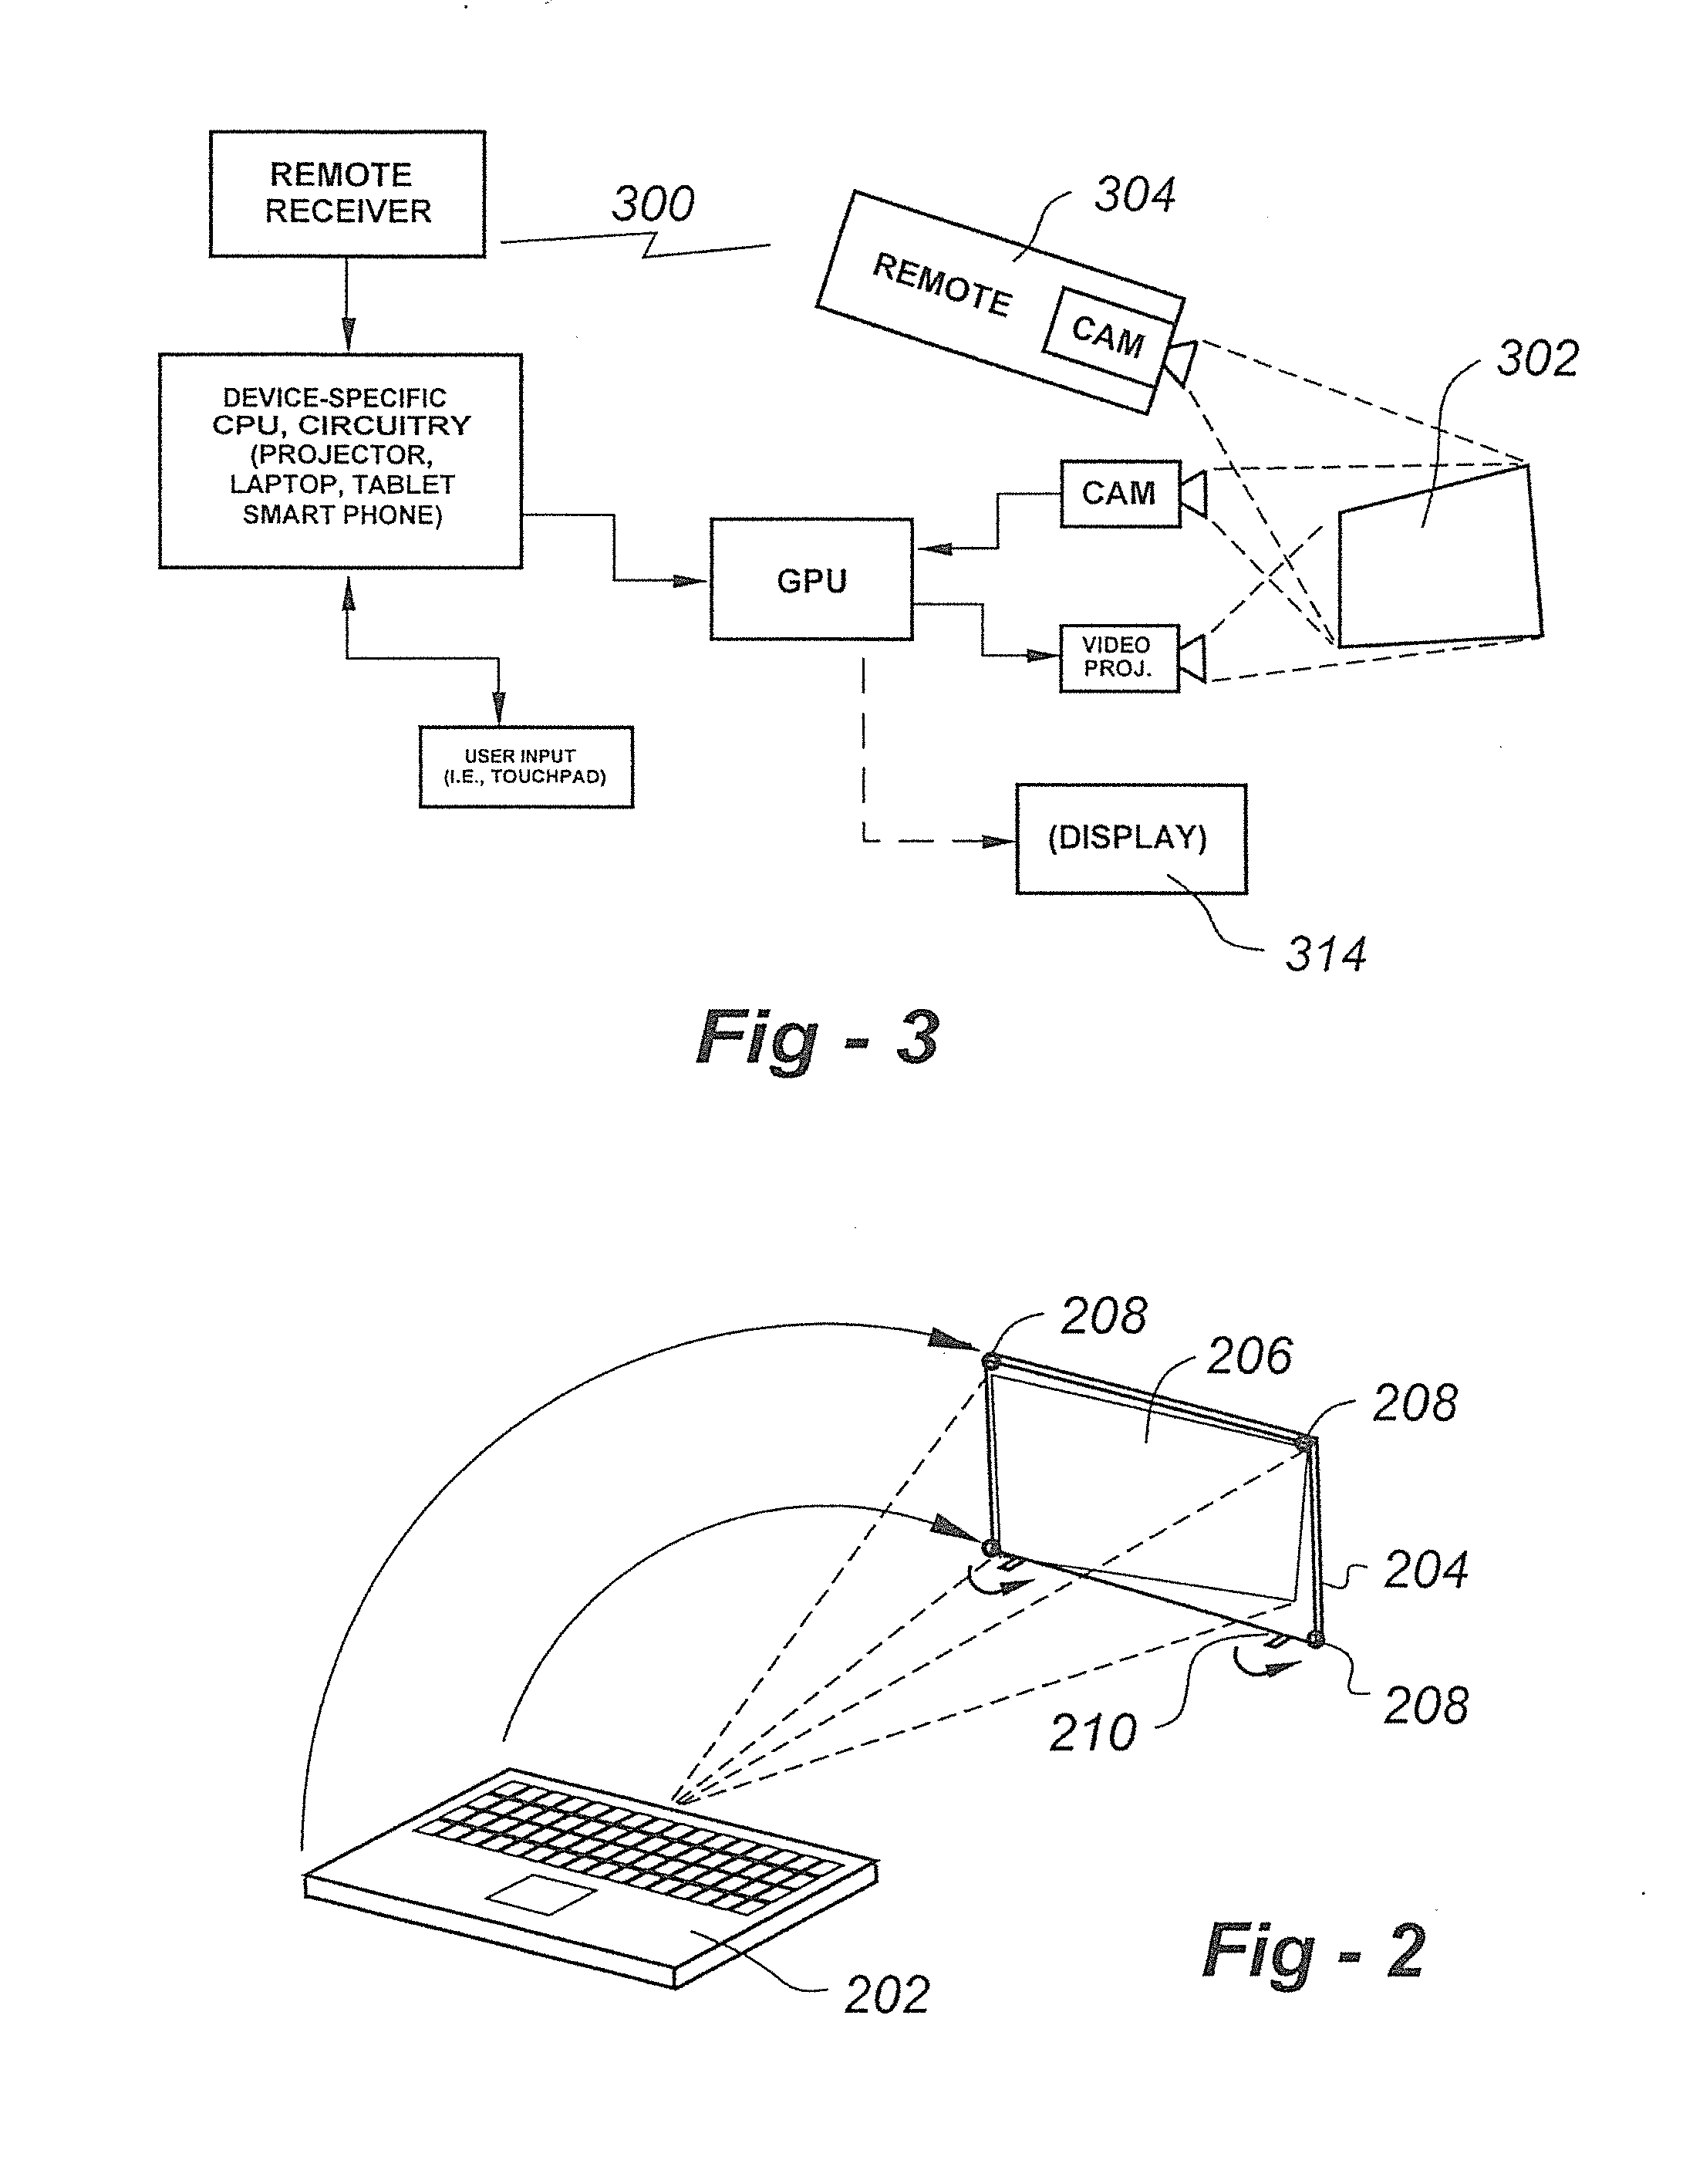 Image projection and control apparatus and methods